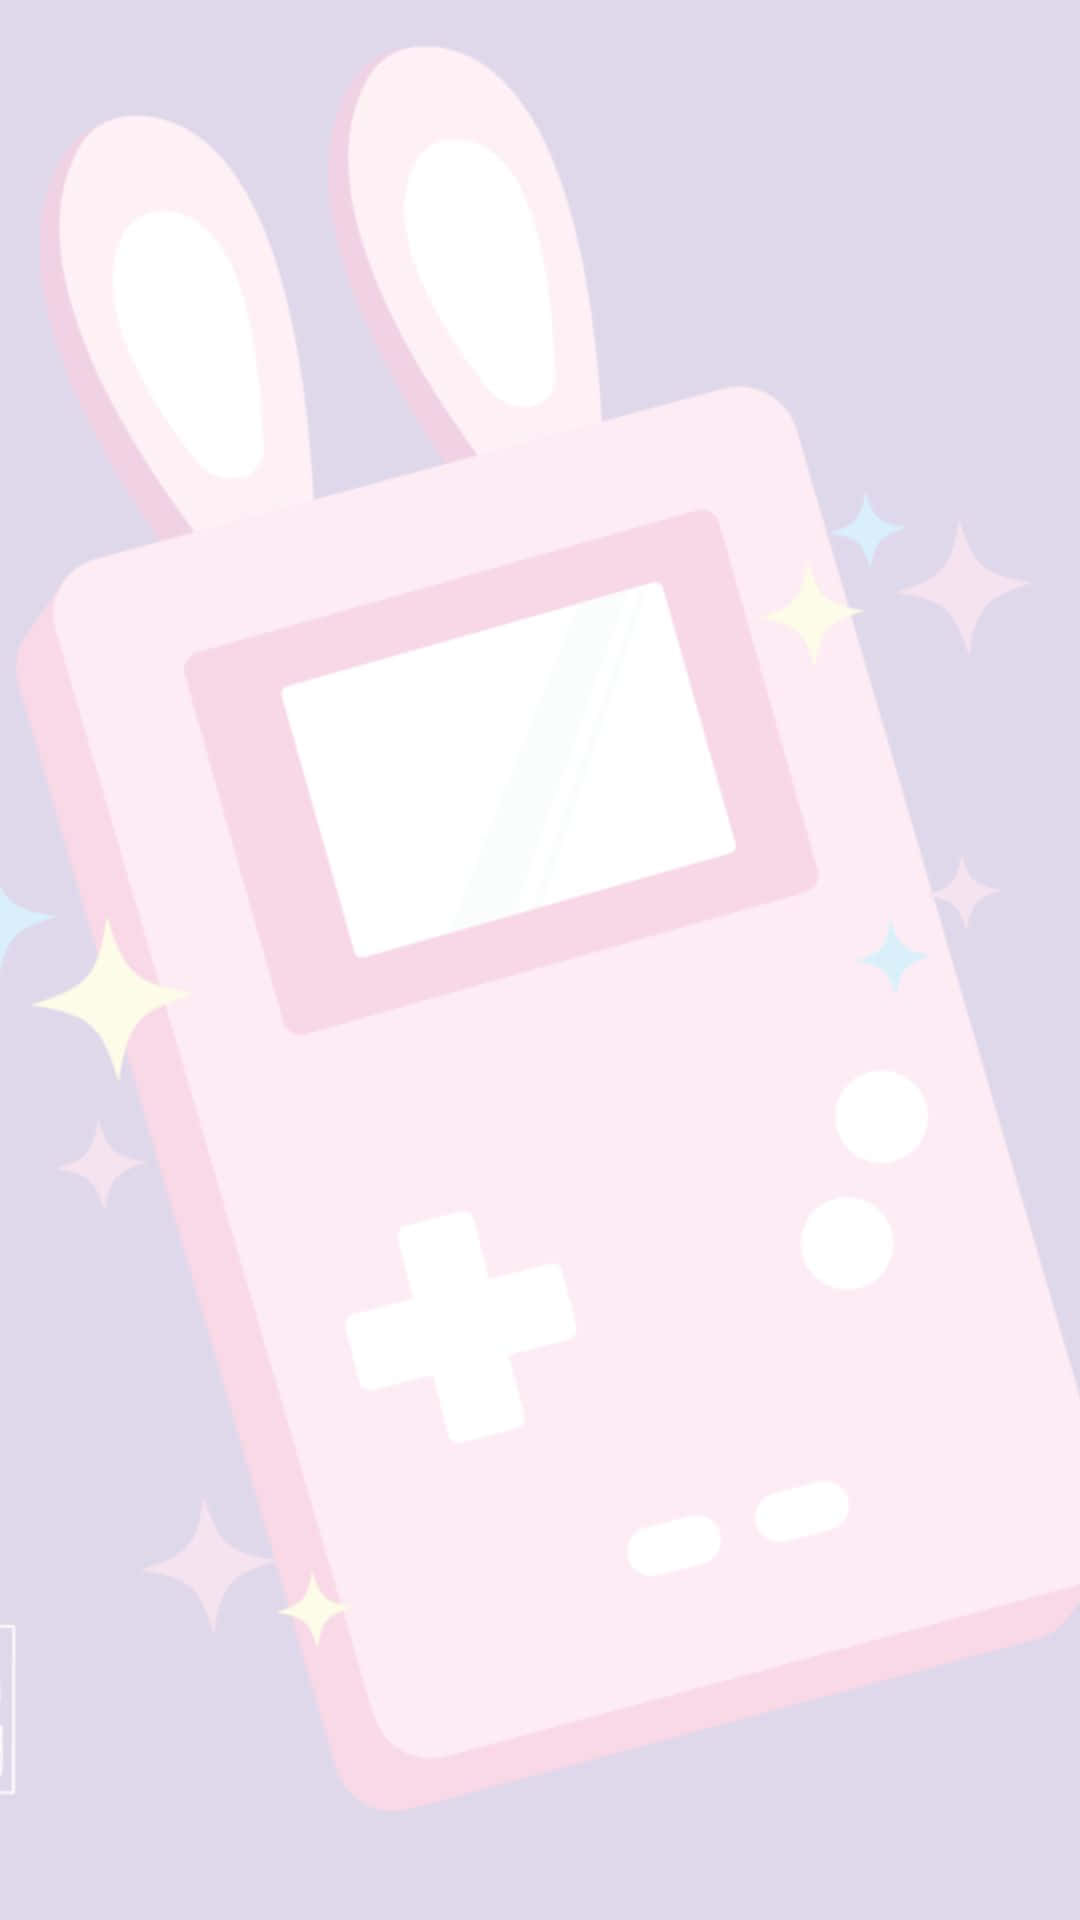 A cute and kawaii wallpaper of a Gameboy with bunny ears - Game Boy